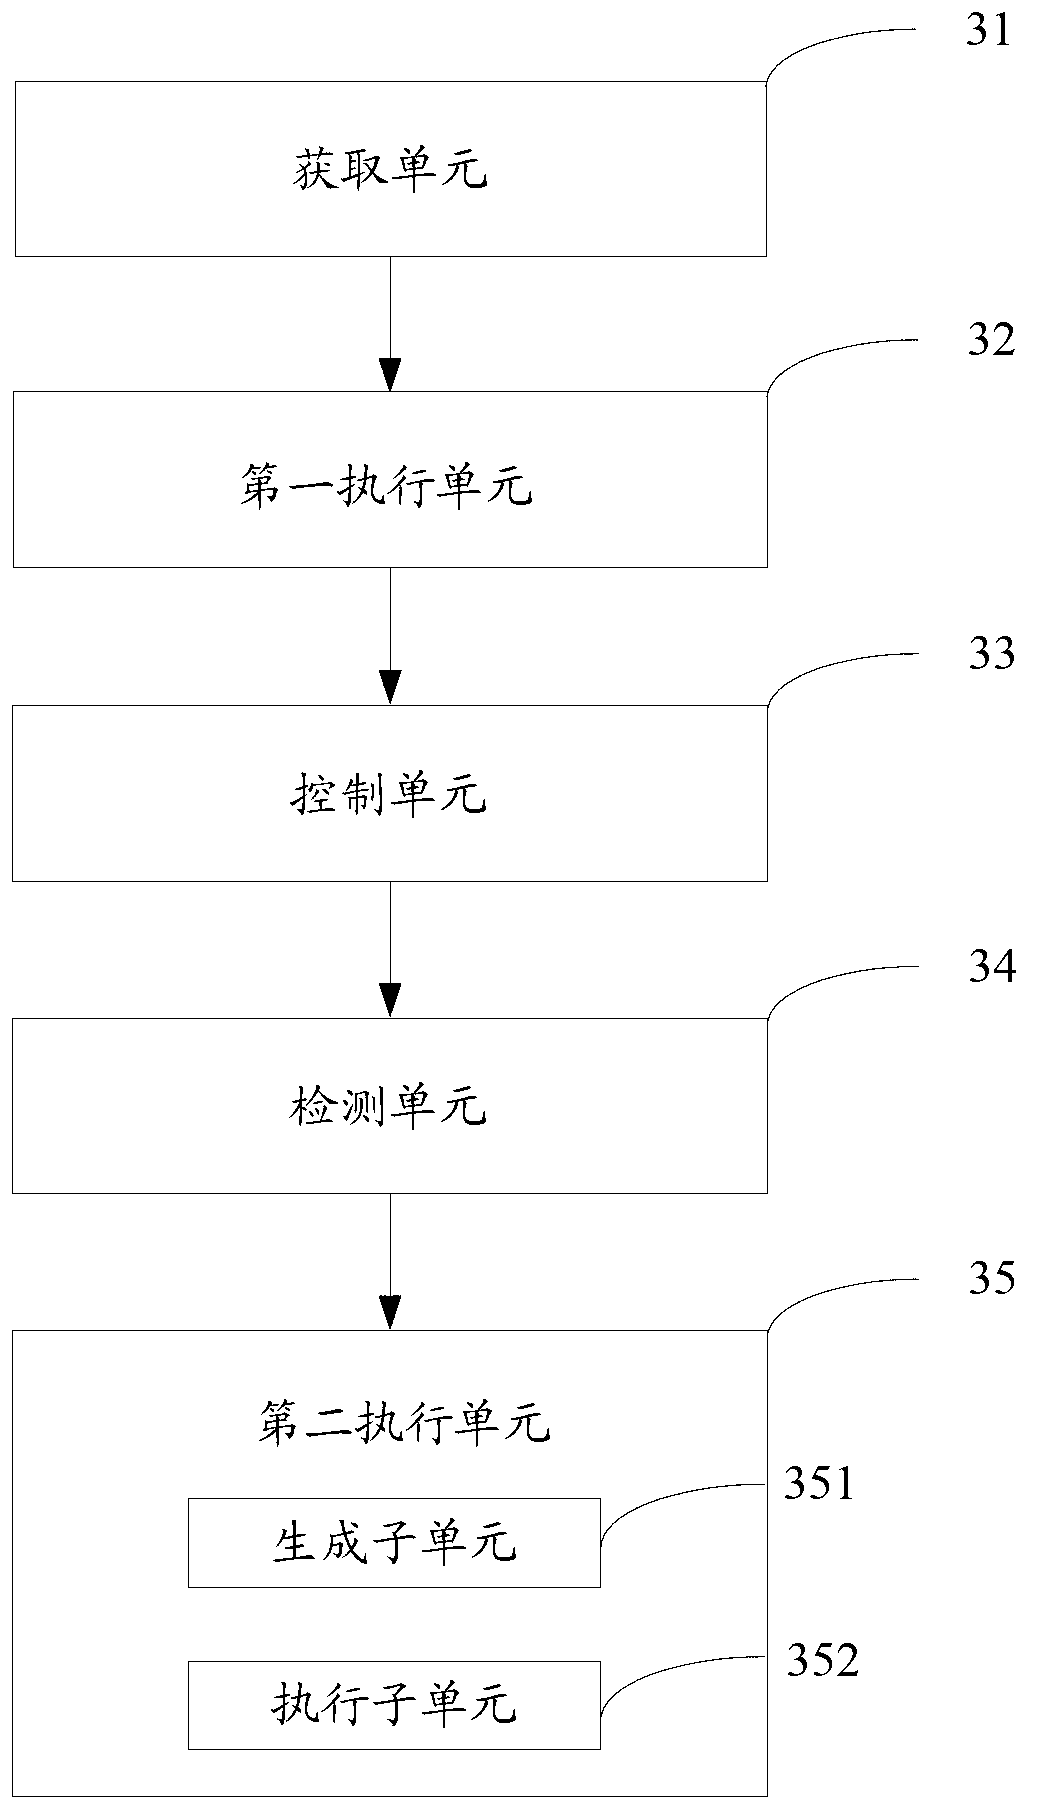 Method and device for sending communication information